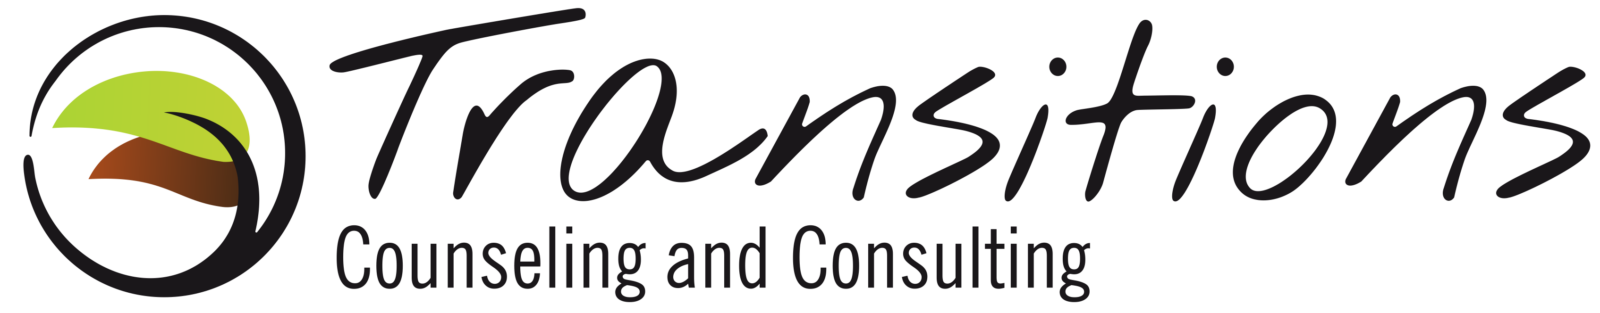 black logo - Transitions Counseling and Consulting